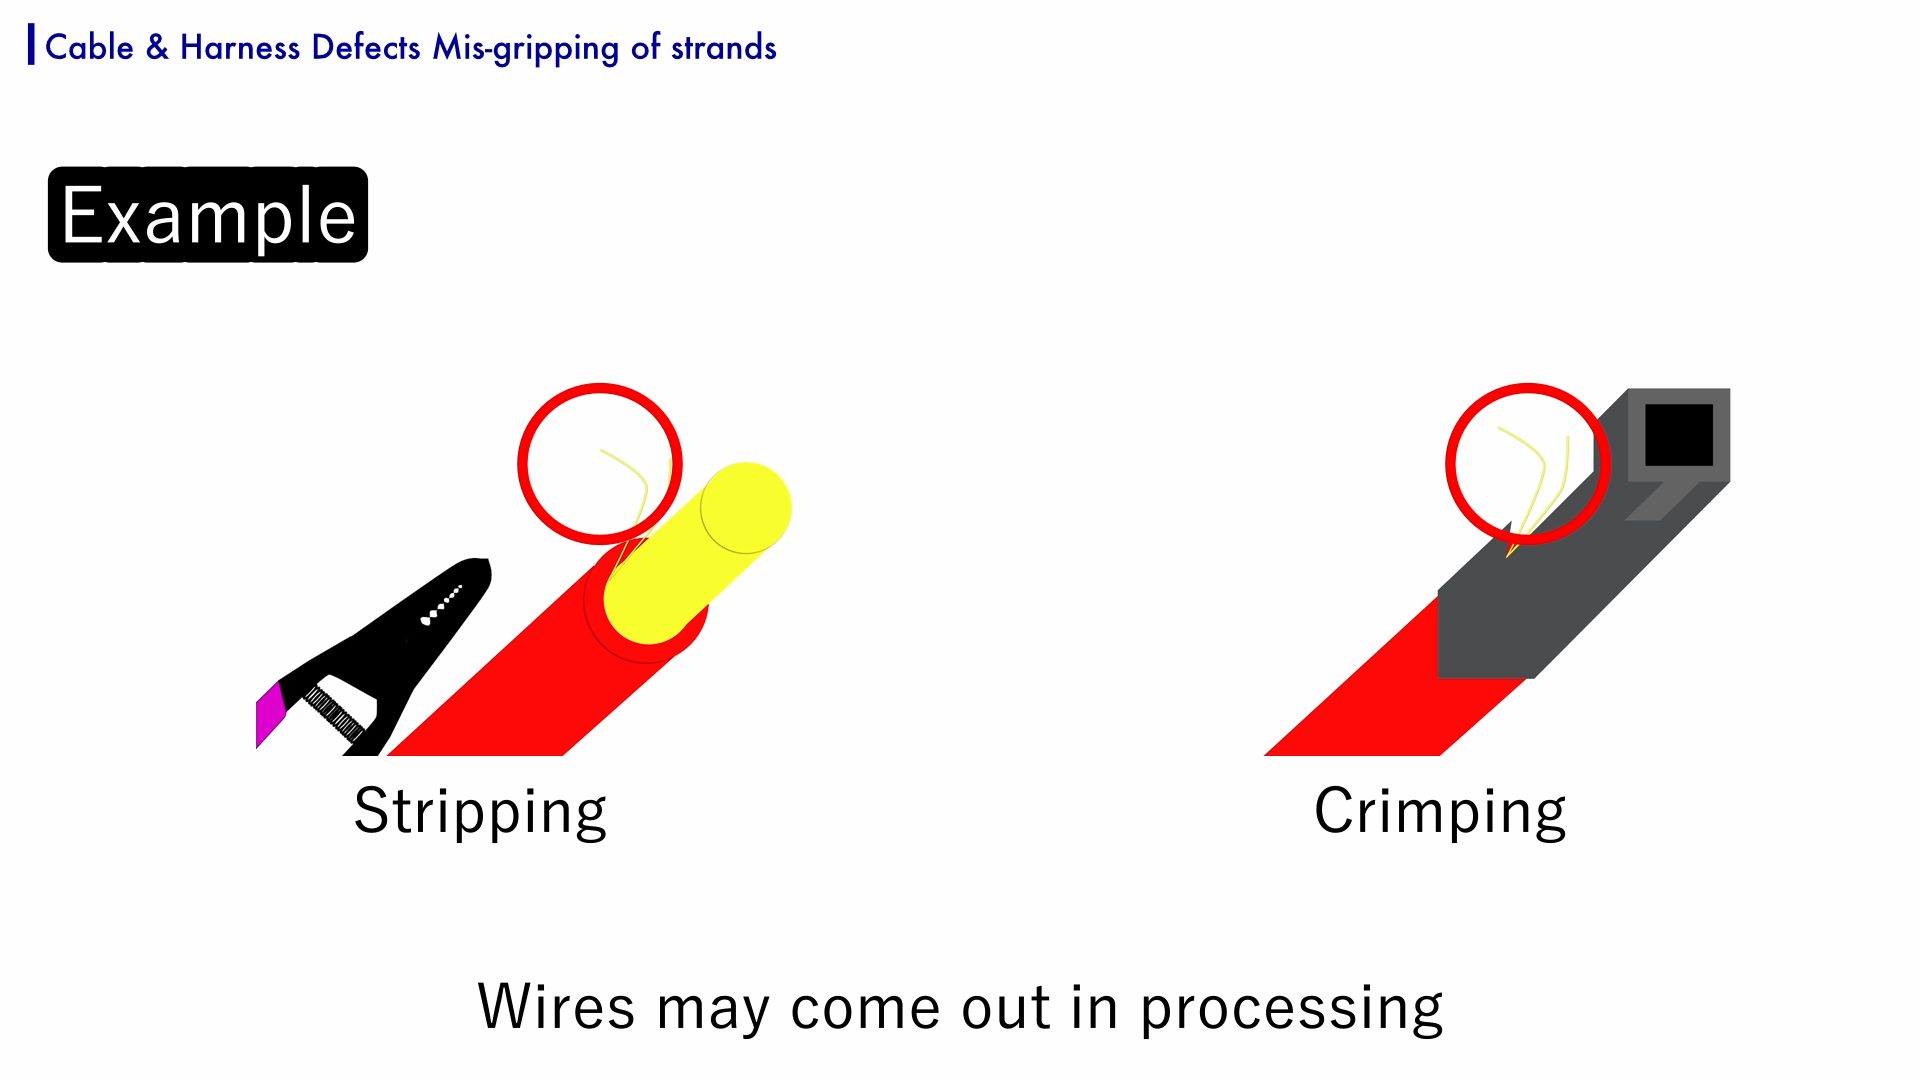 Mis-gripping of strands is a processing error in processing